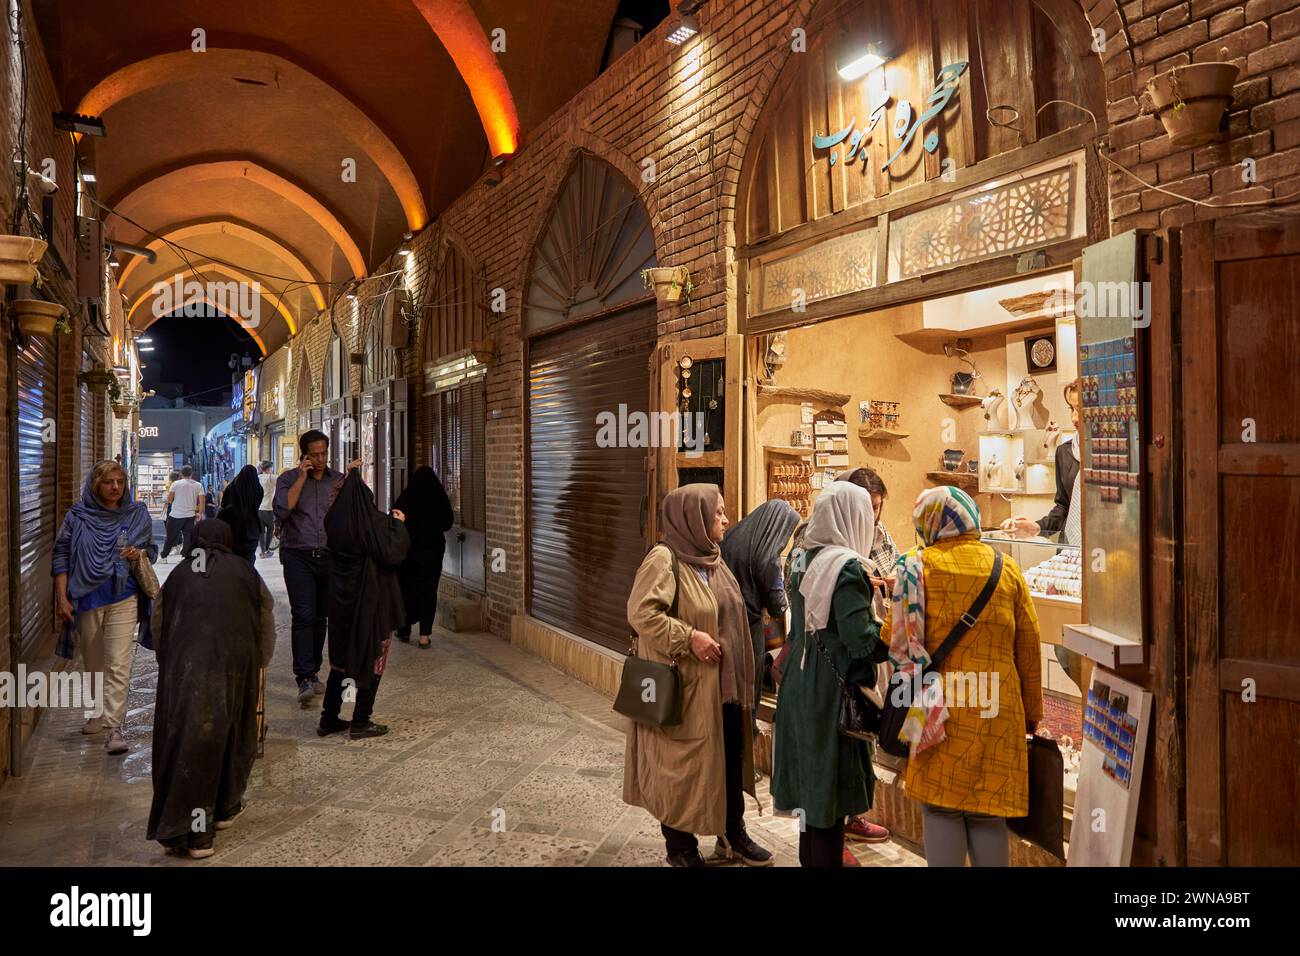 People walk in a busy narrow covered street brightly illuminated at night. Old City of Yazd, Iran. Stock Photo